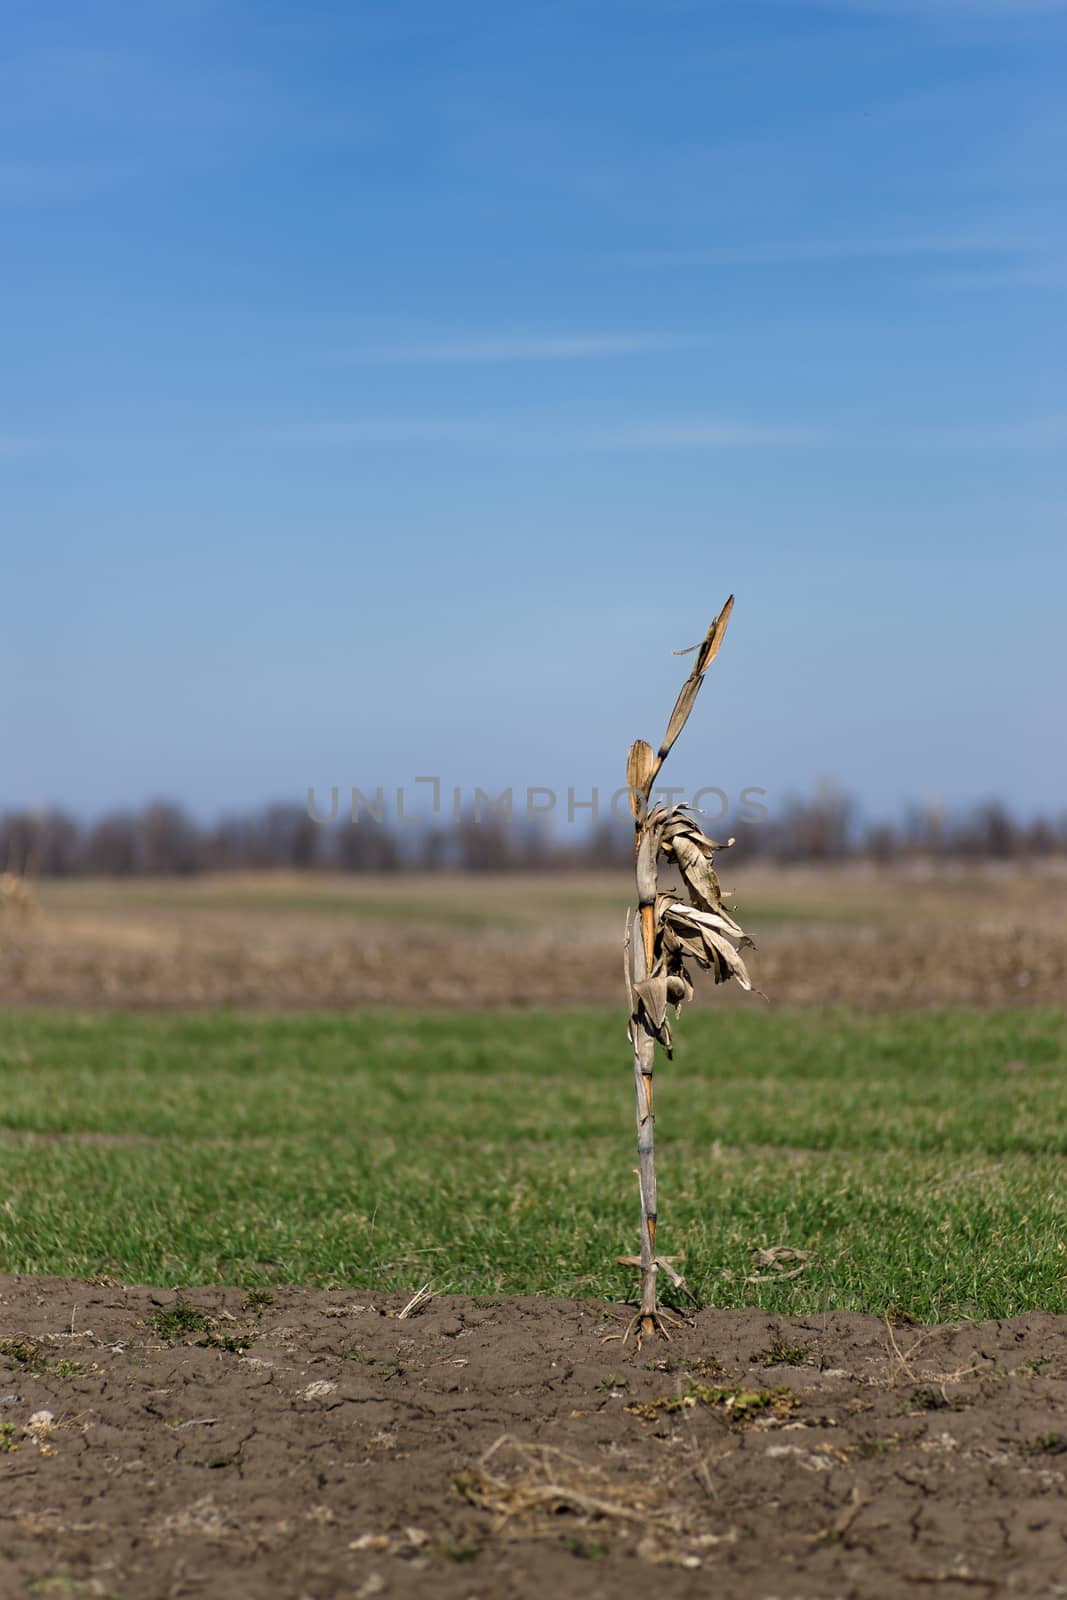 Lonely corn bush on the field. Meditation and lonely concept.